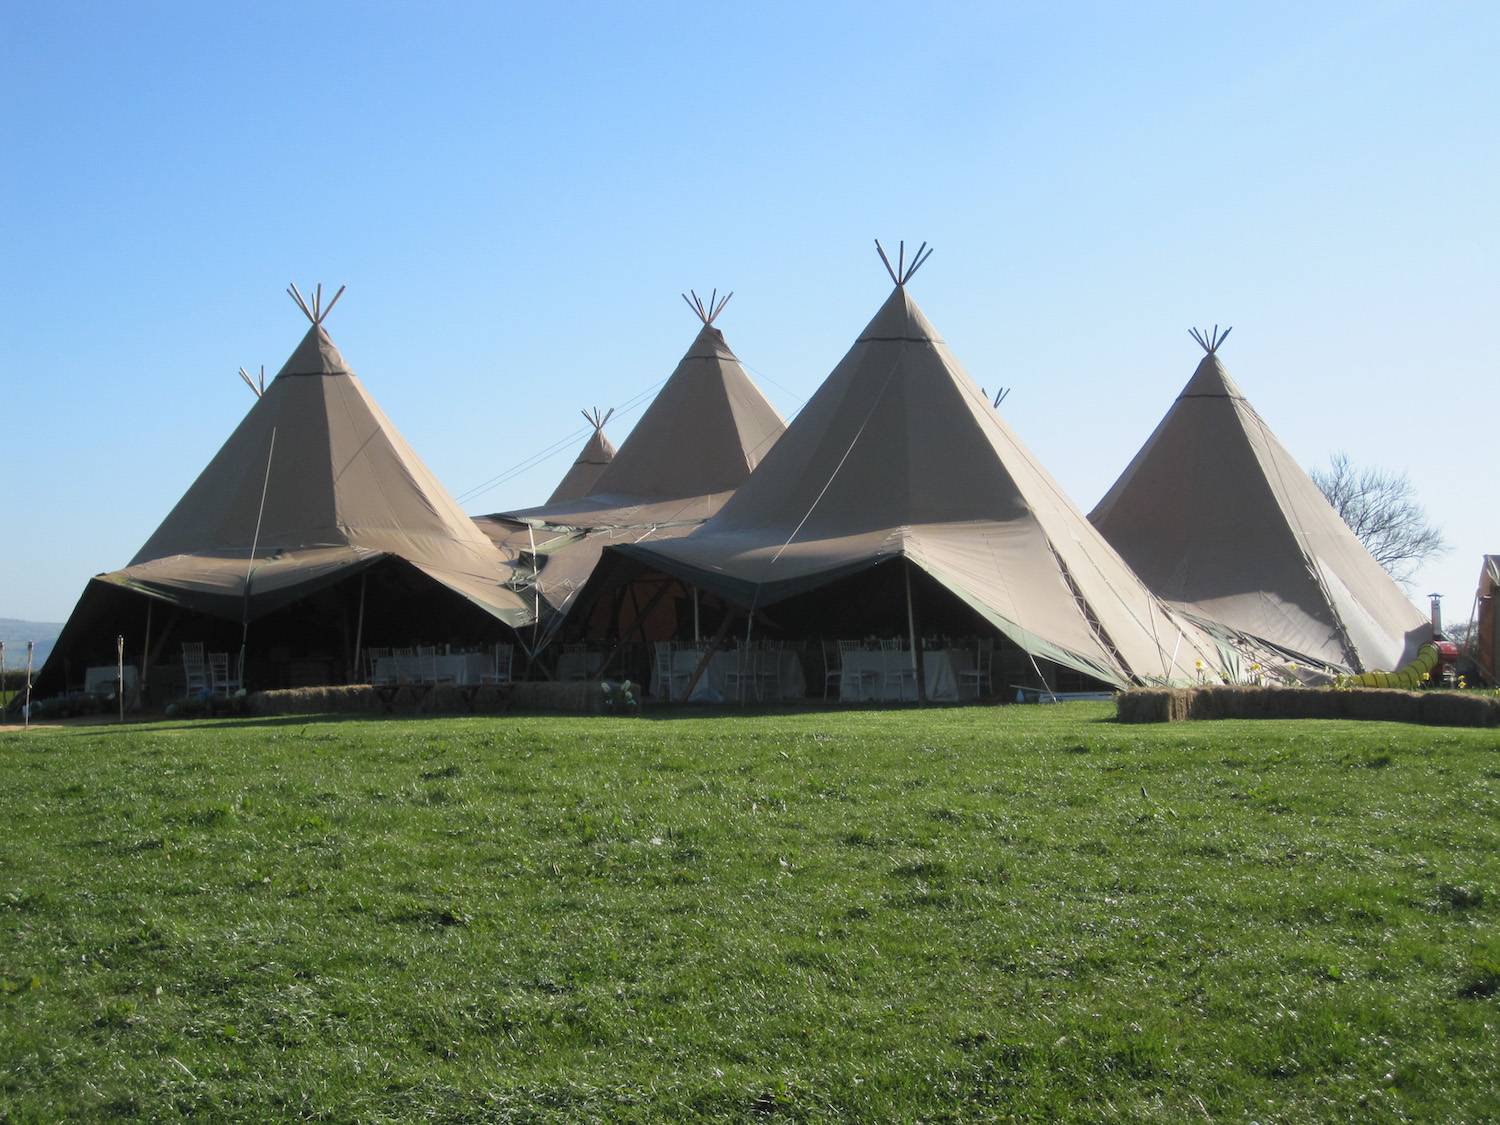 From cosy and intimate spaces to grand and spacious layouts, our tipi floor plans offer a unique and versatile option for any event. With their signature design and elegant canvas walls, our tipis can be configured in a variety of ways to suit your specific needs and preferences. Whether you're hosting a wedding, corporate event or private party, our expert team can work with you to create the perfect floor plan for your event.